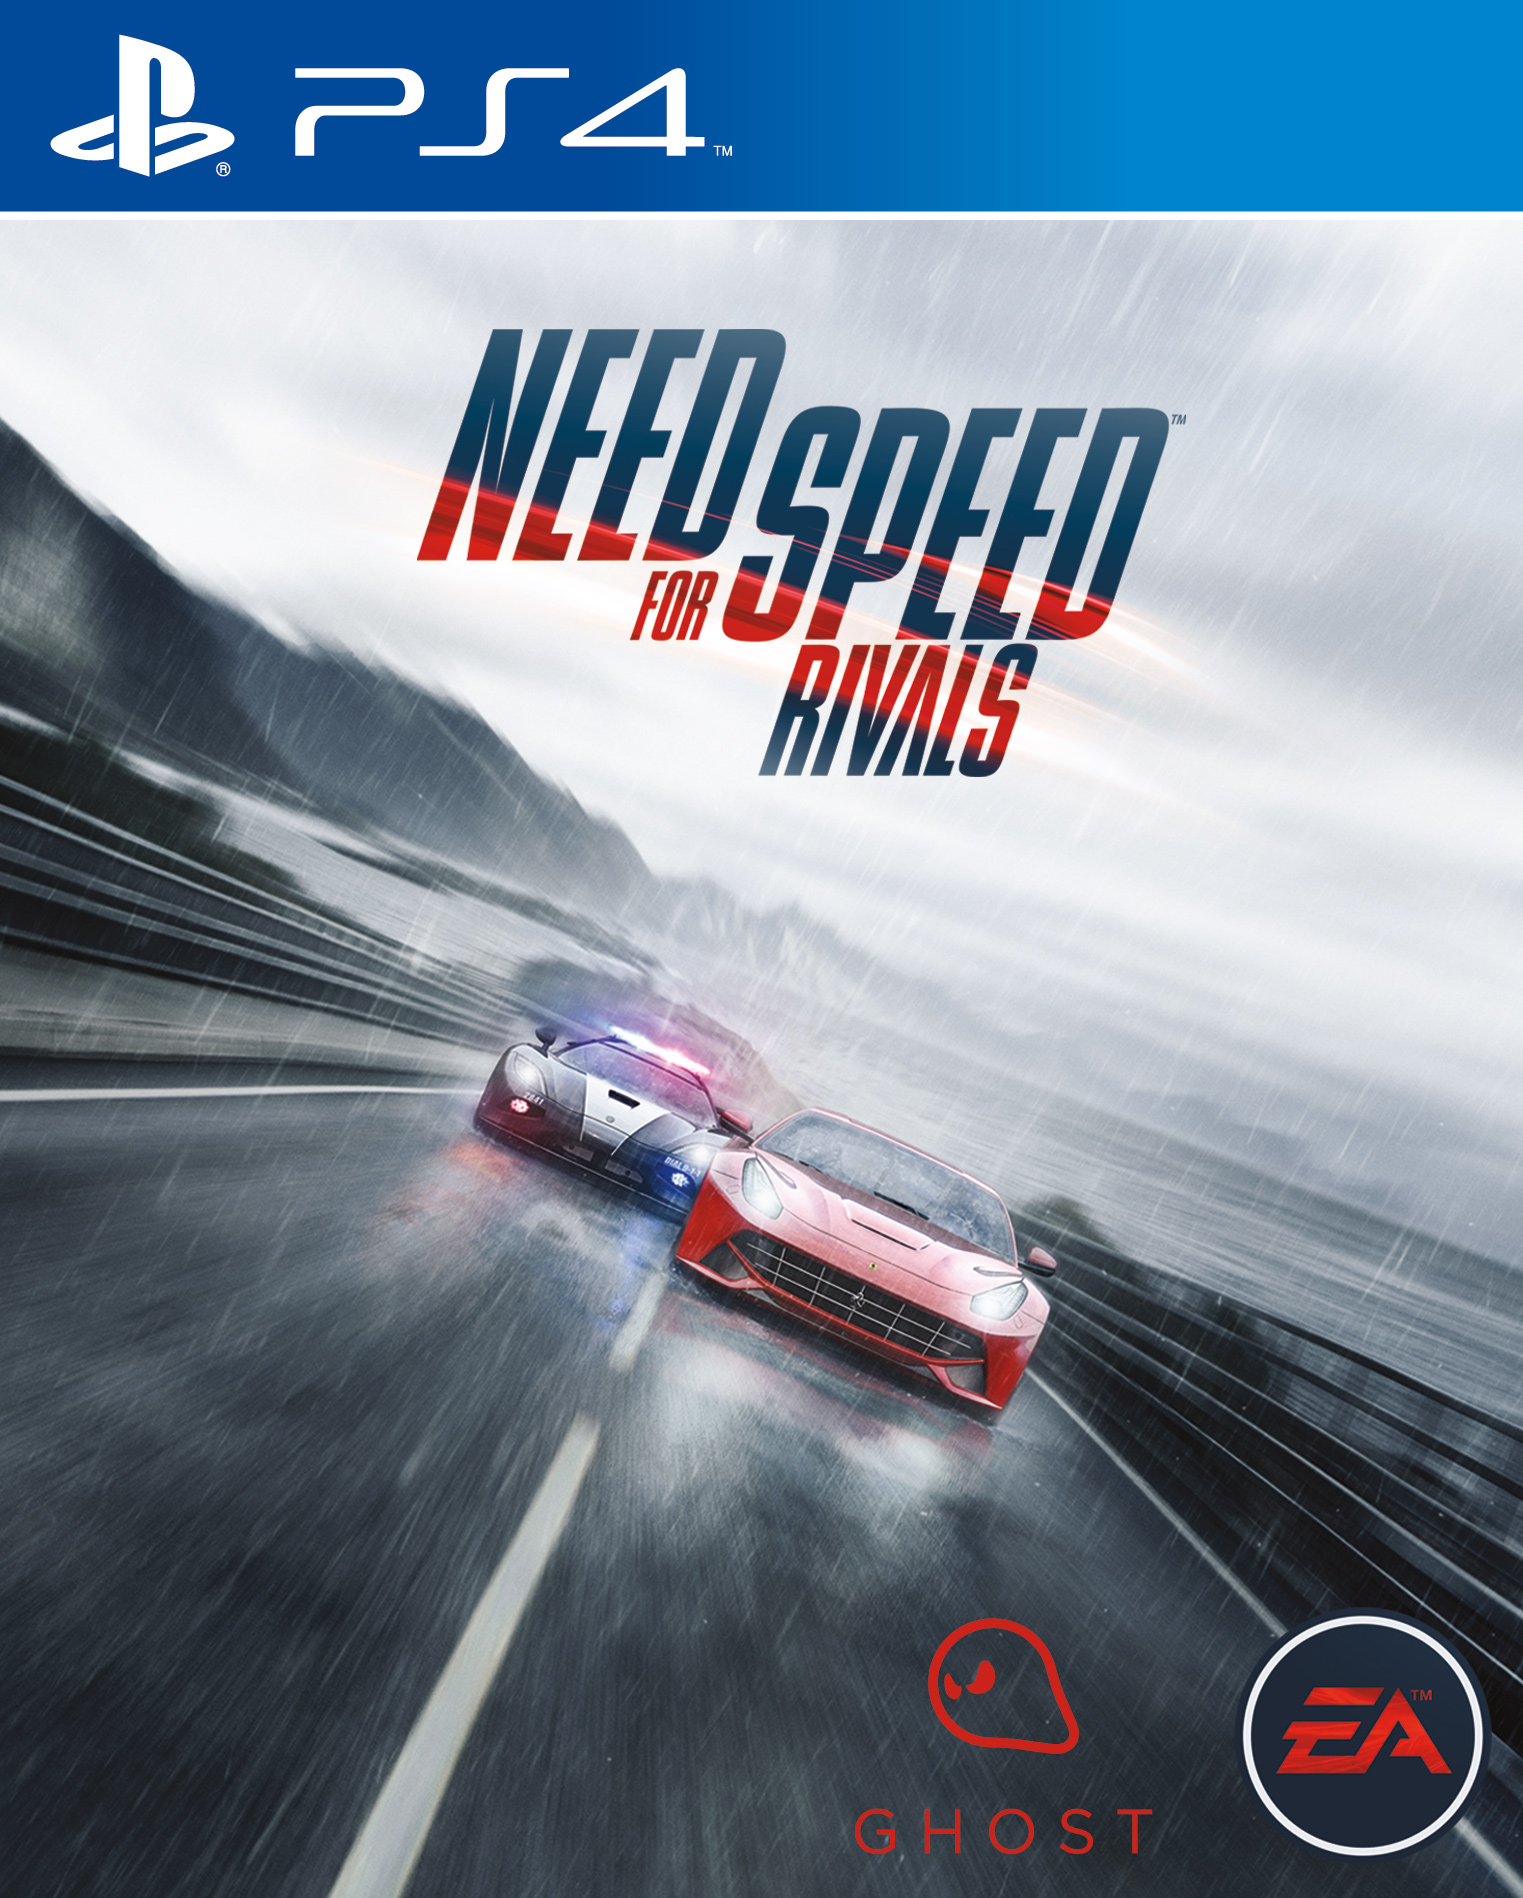 Buy Need Speed Ps4 | UP TO 54% OFF